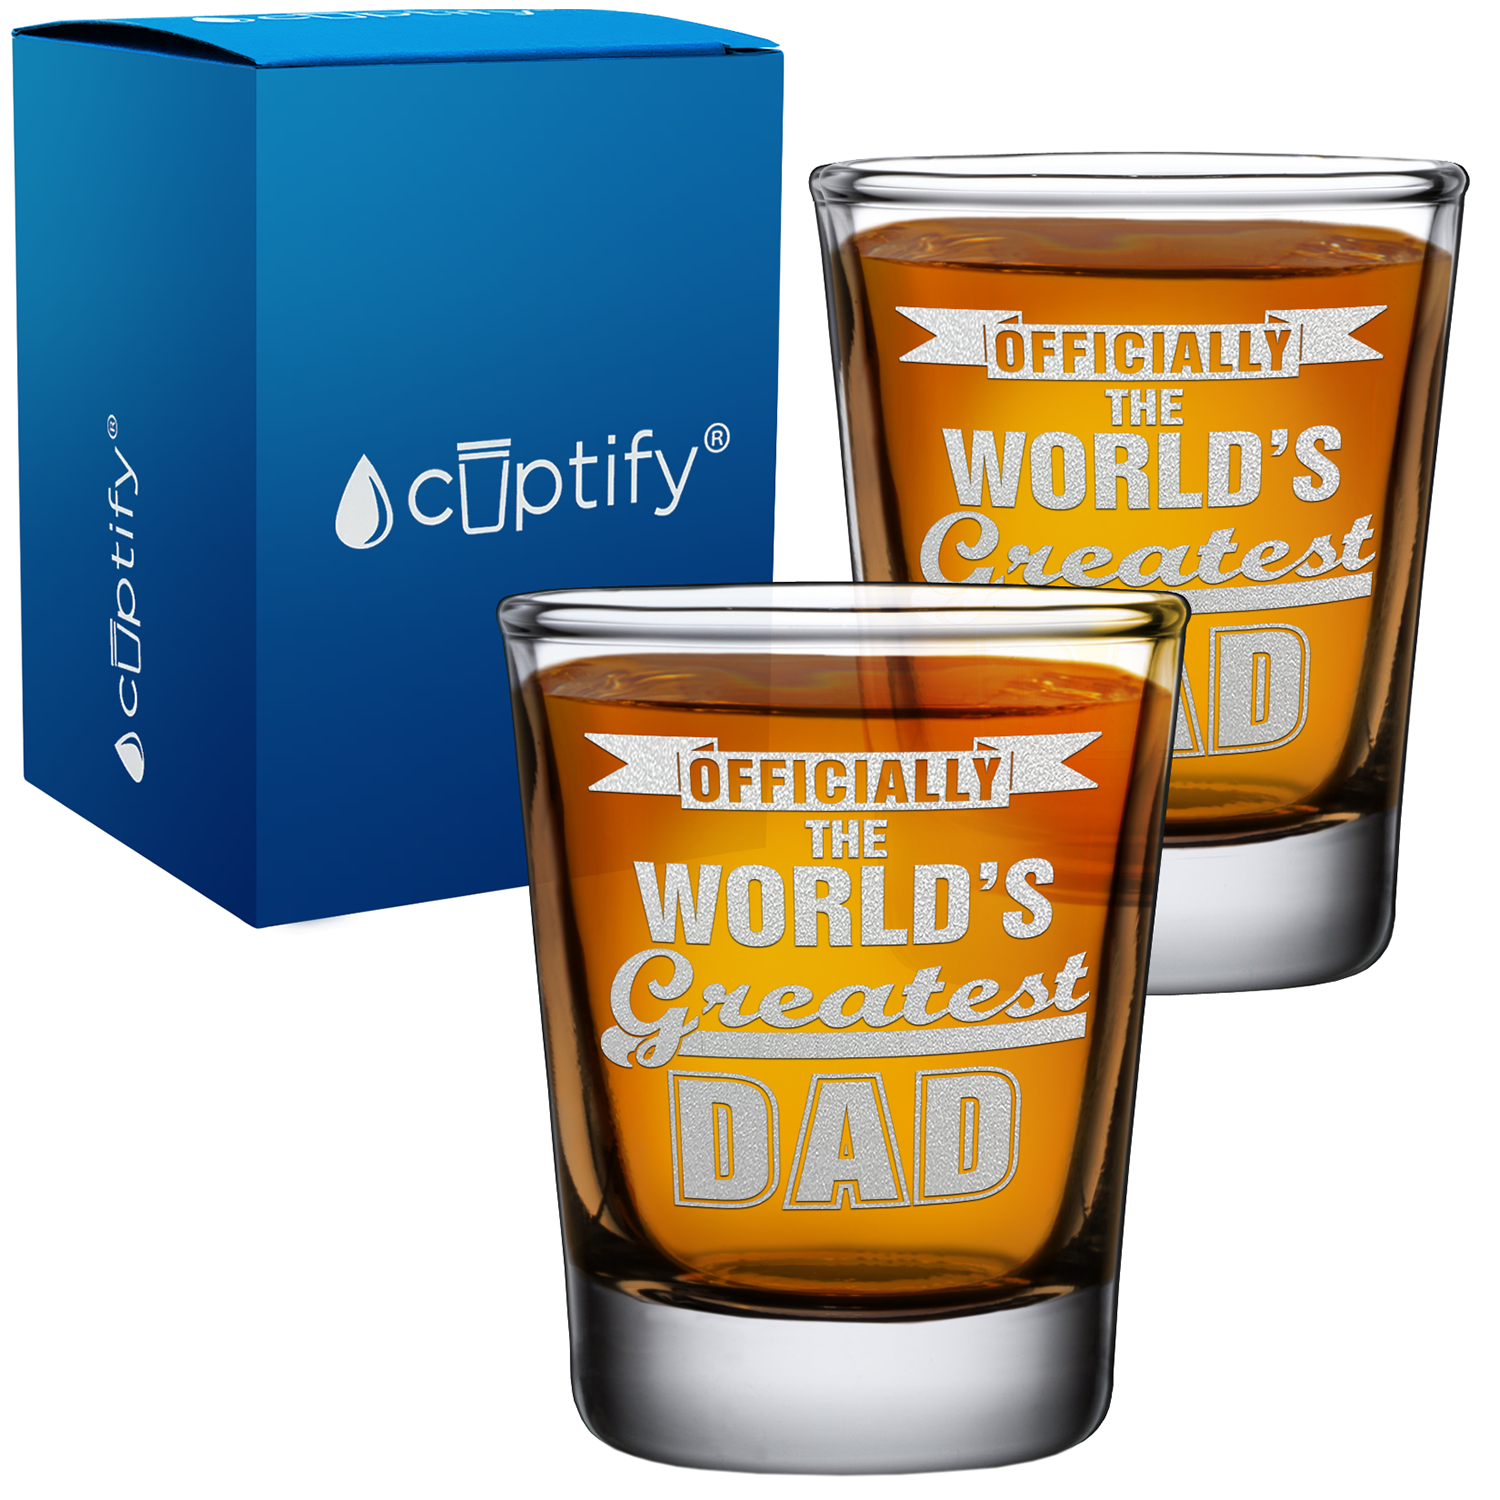 Officially The World's Greatest Dad 2oz Shot Glasses - Set of 2